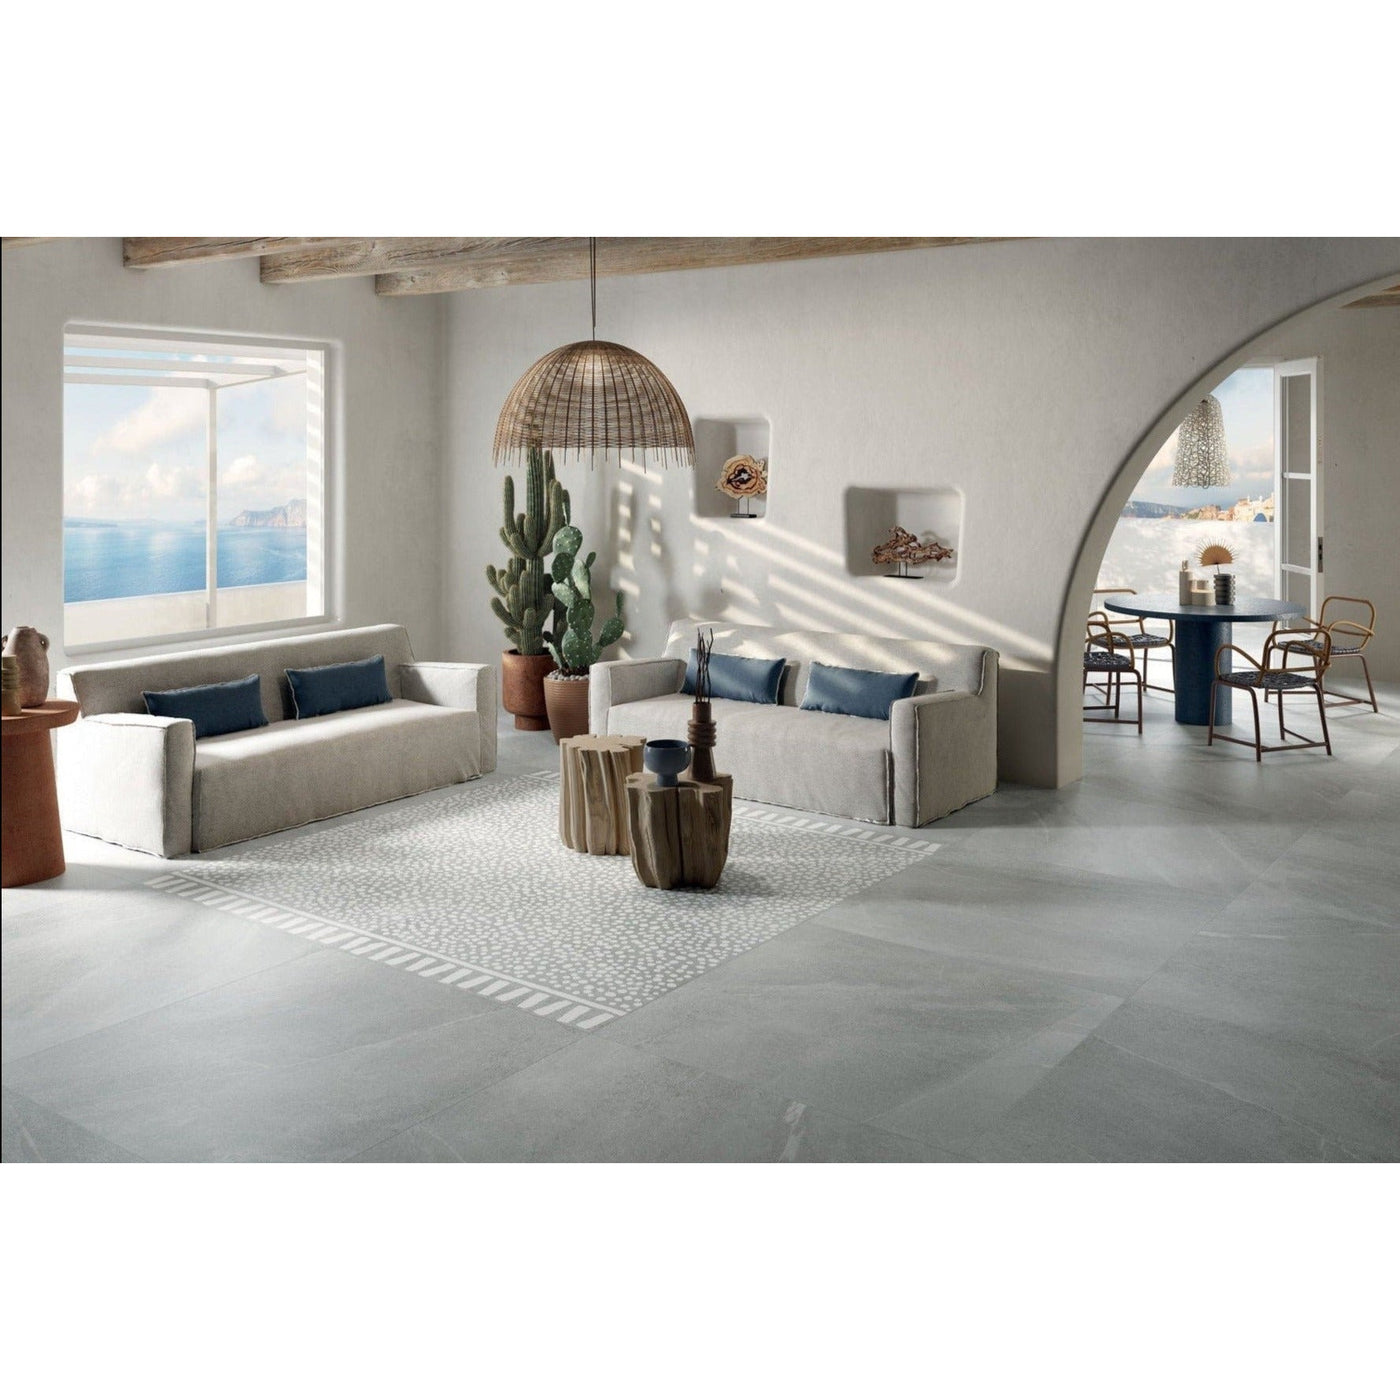 Grey Ash - A light Mediterranean tile designed with a blend of textures - Letta London - 